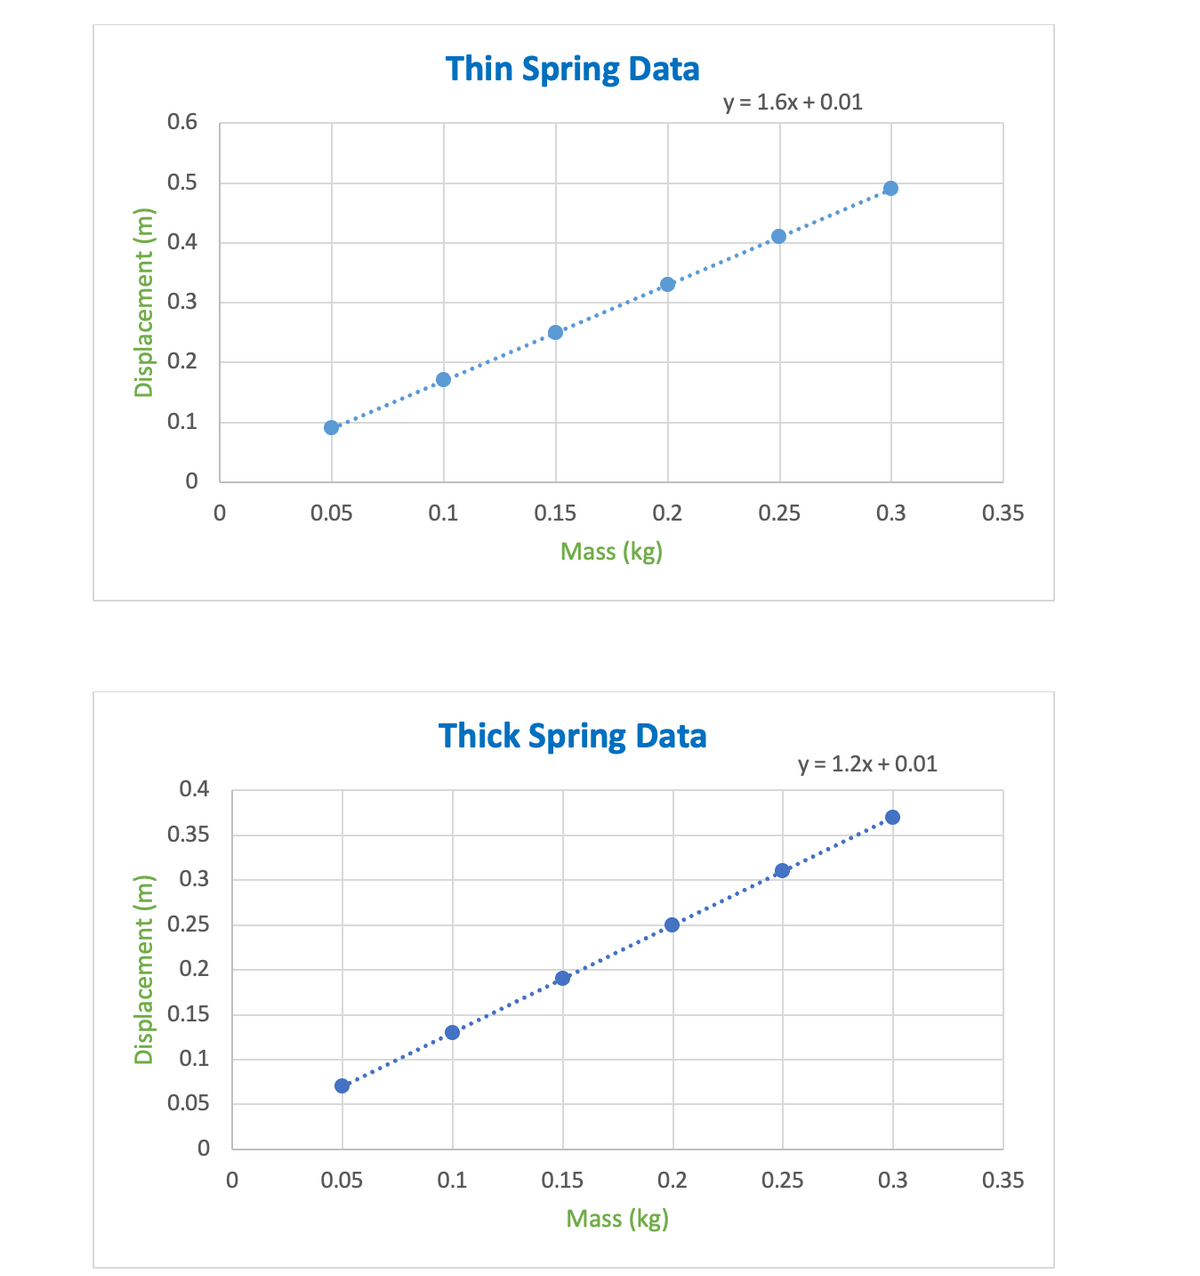 Thin Spring Data
y = 1.6x + 0.01
0.6
0.5
0.4
0.3
0.2
0.1
0.05
0.1
0.15
0.2
0.25
0.3
0.35
Mass (kg)
Thick Spring Data
y = 1.2x + 0.01
0.4
0.35
0.3
0.25
0.2
0.15
0.1
0.05
0.05
0.1
0.15
0.2
0.25
0.3
0.35
Mass (kg)
Displacement (m)
Displacement (m)
